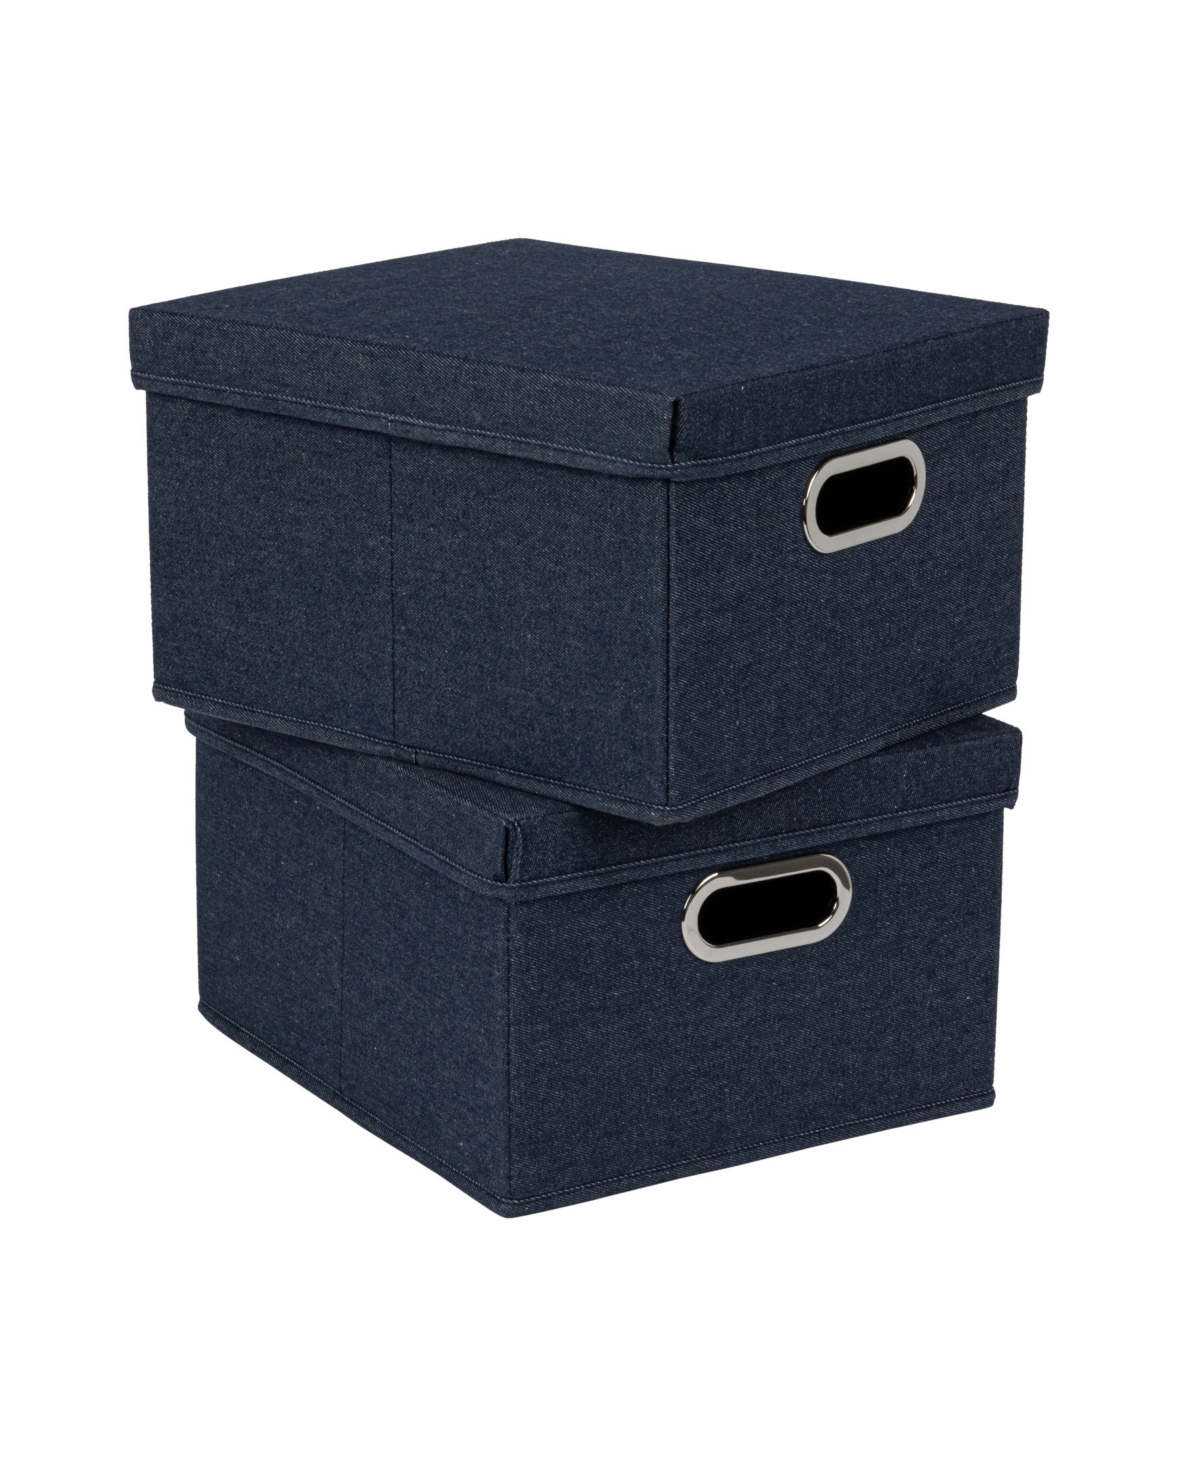 Household Essentials Collapsible Cotton Blend Storage Box With Lid And Metal Grommet Handle, Set Of 2 In Blue